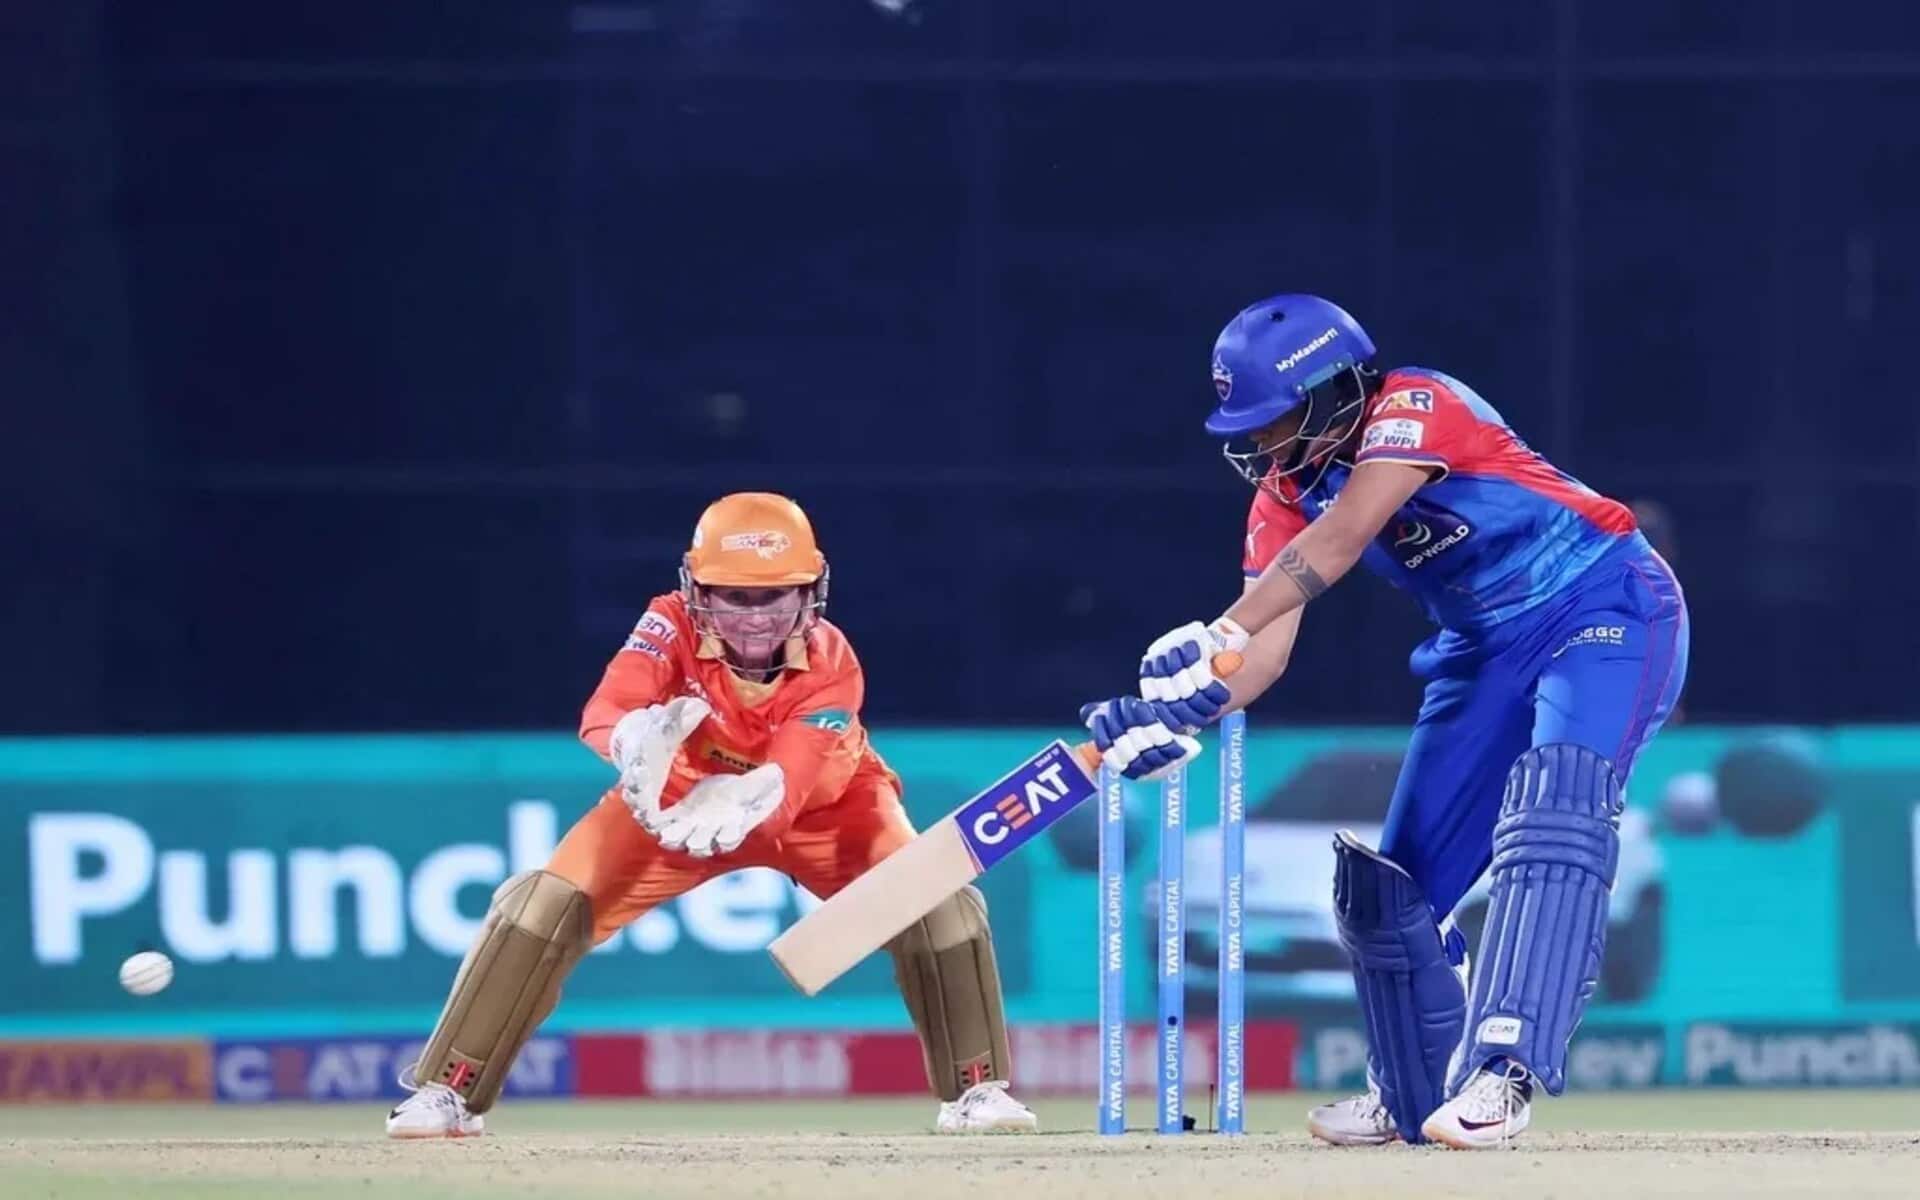 Shafali Verma finds three boundaries in the over (Source: WPL)